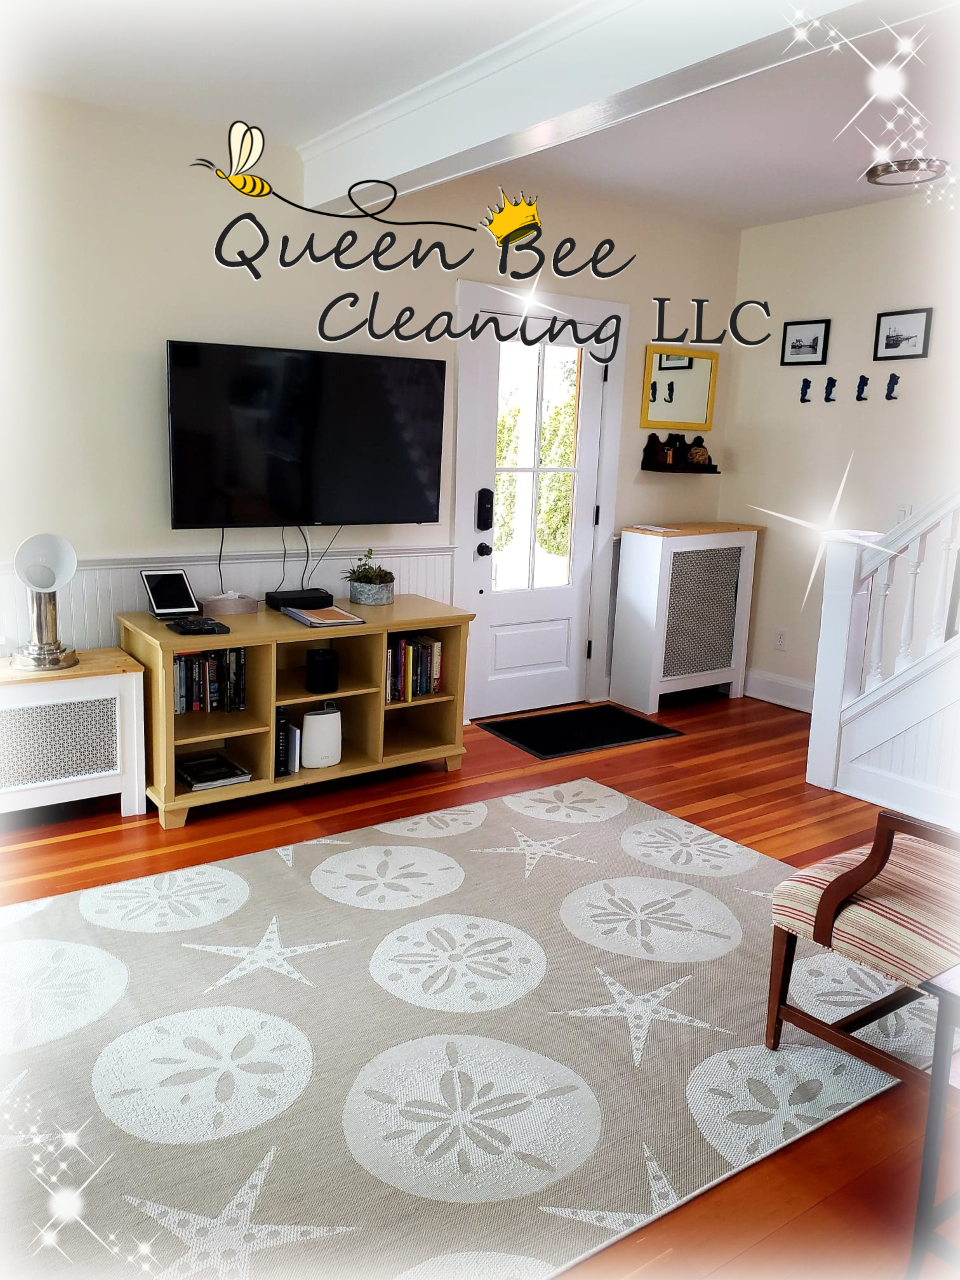 Queen Bee Cleaning 235 Ross Rd, Danielson Connecticut 06239